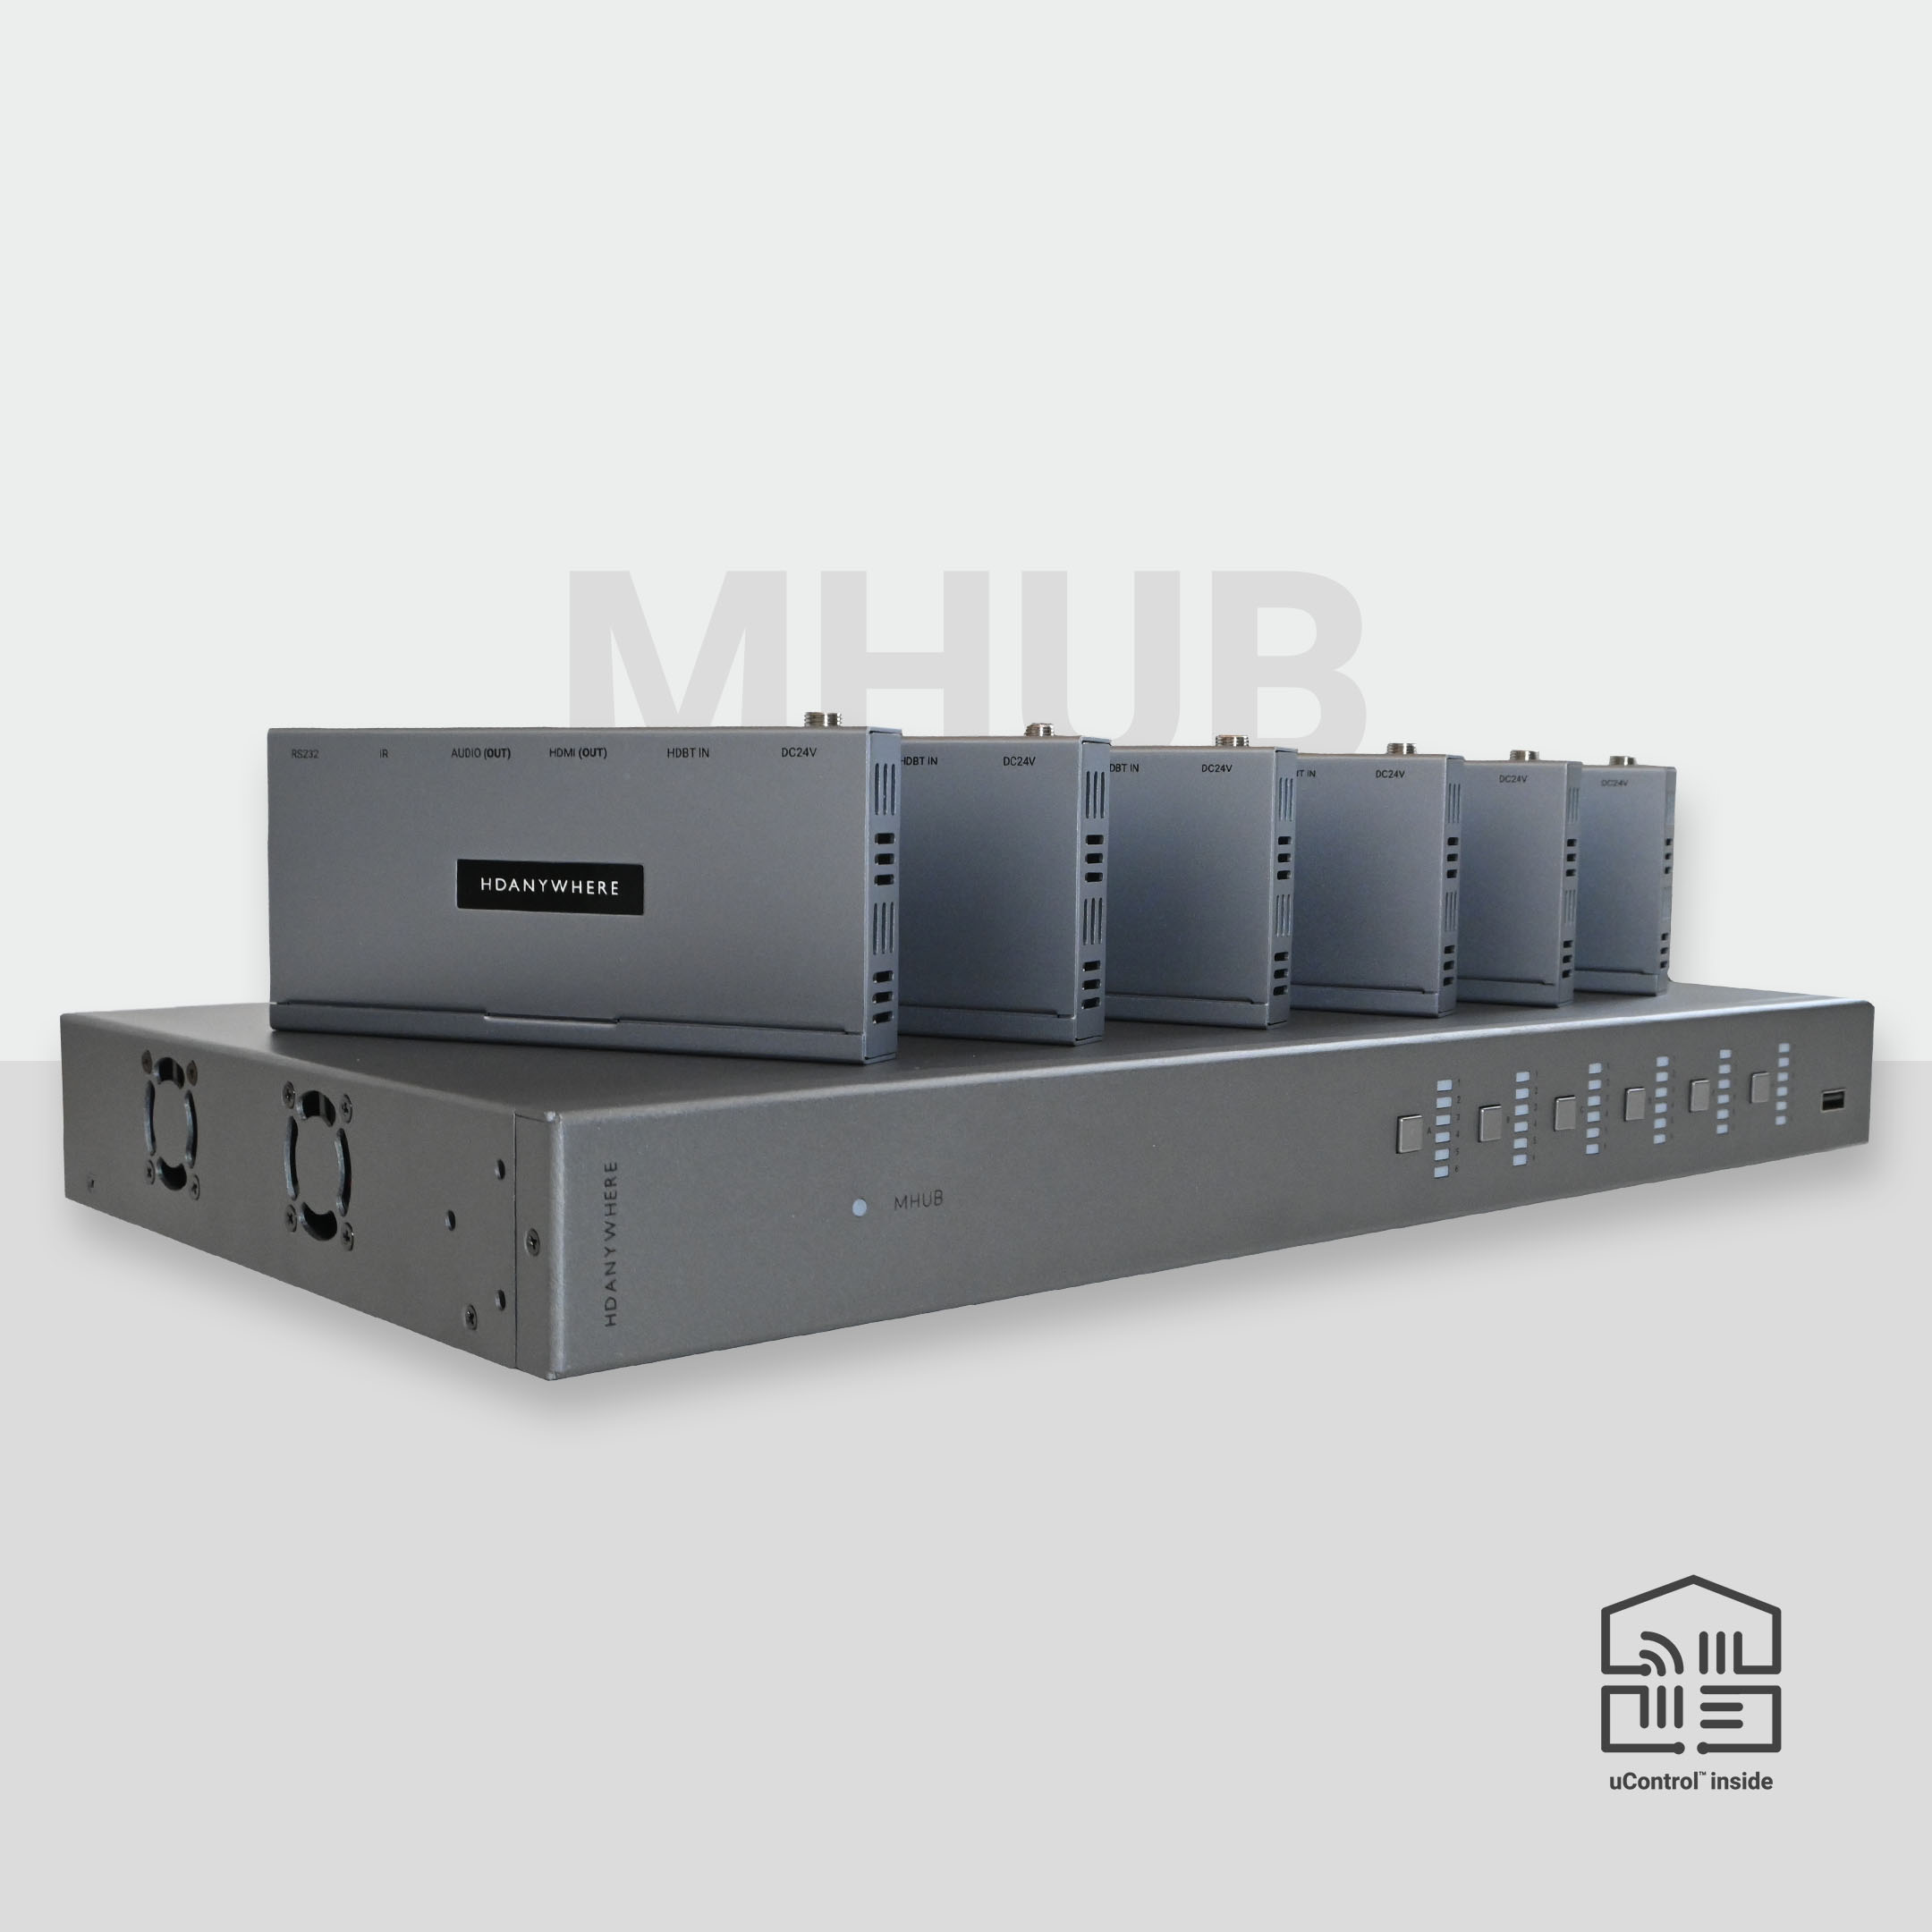 MHUB (6x6) 100A with its packaging